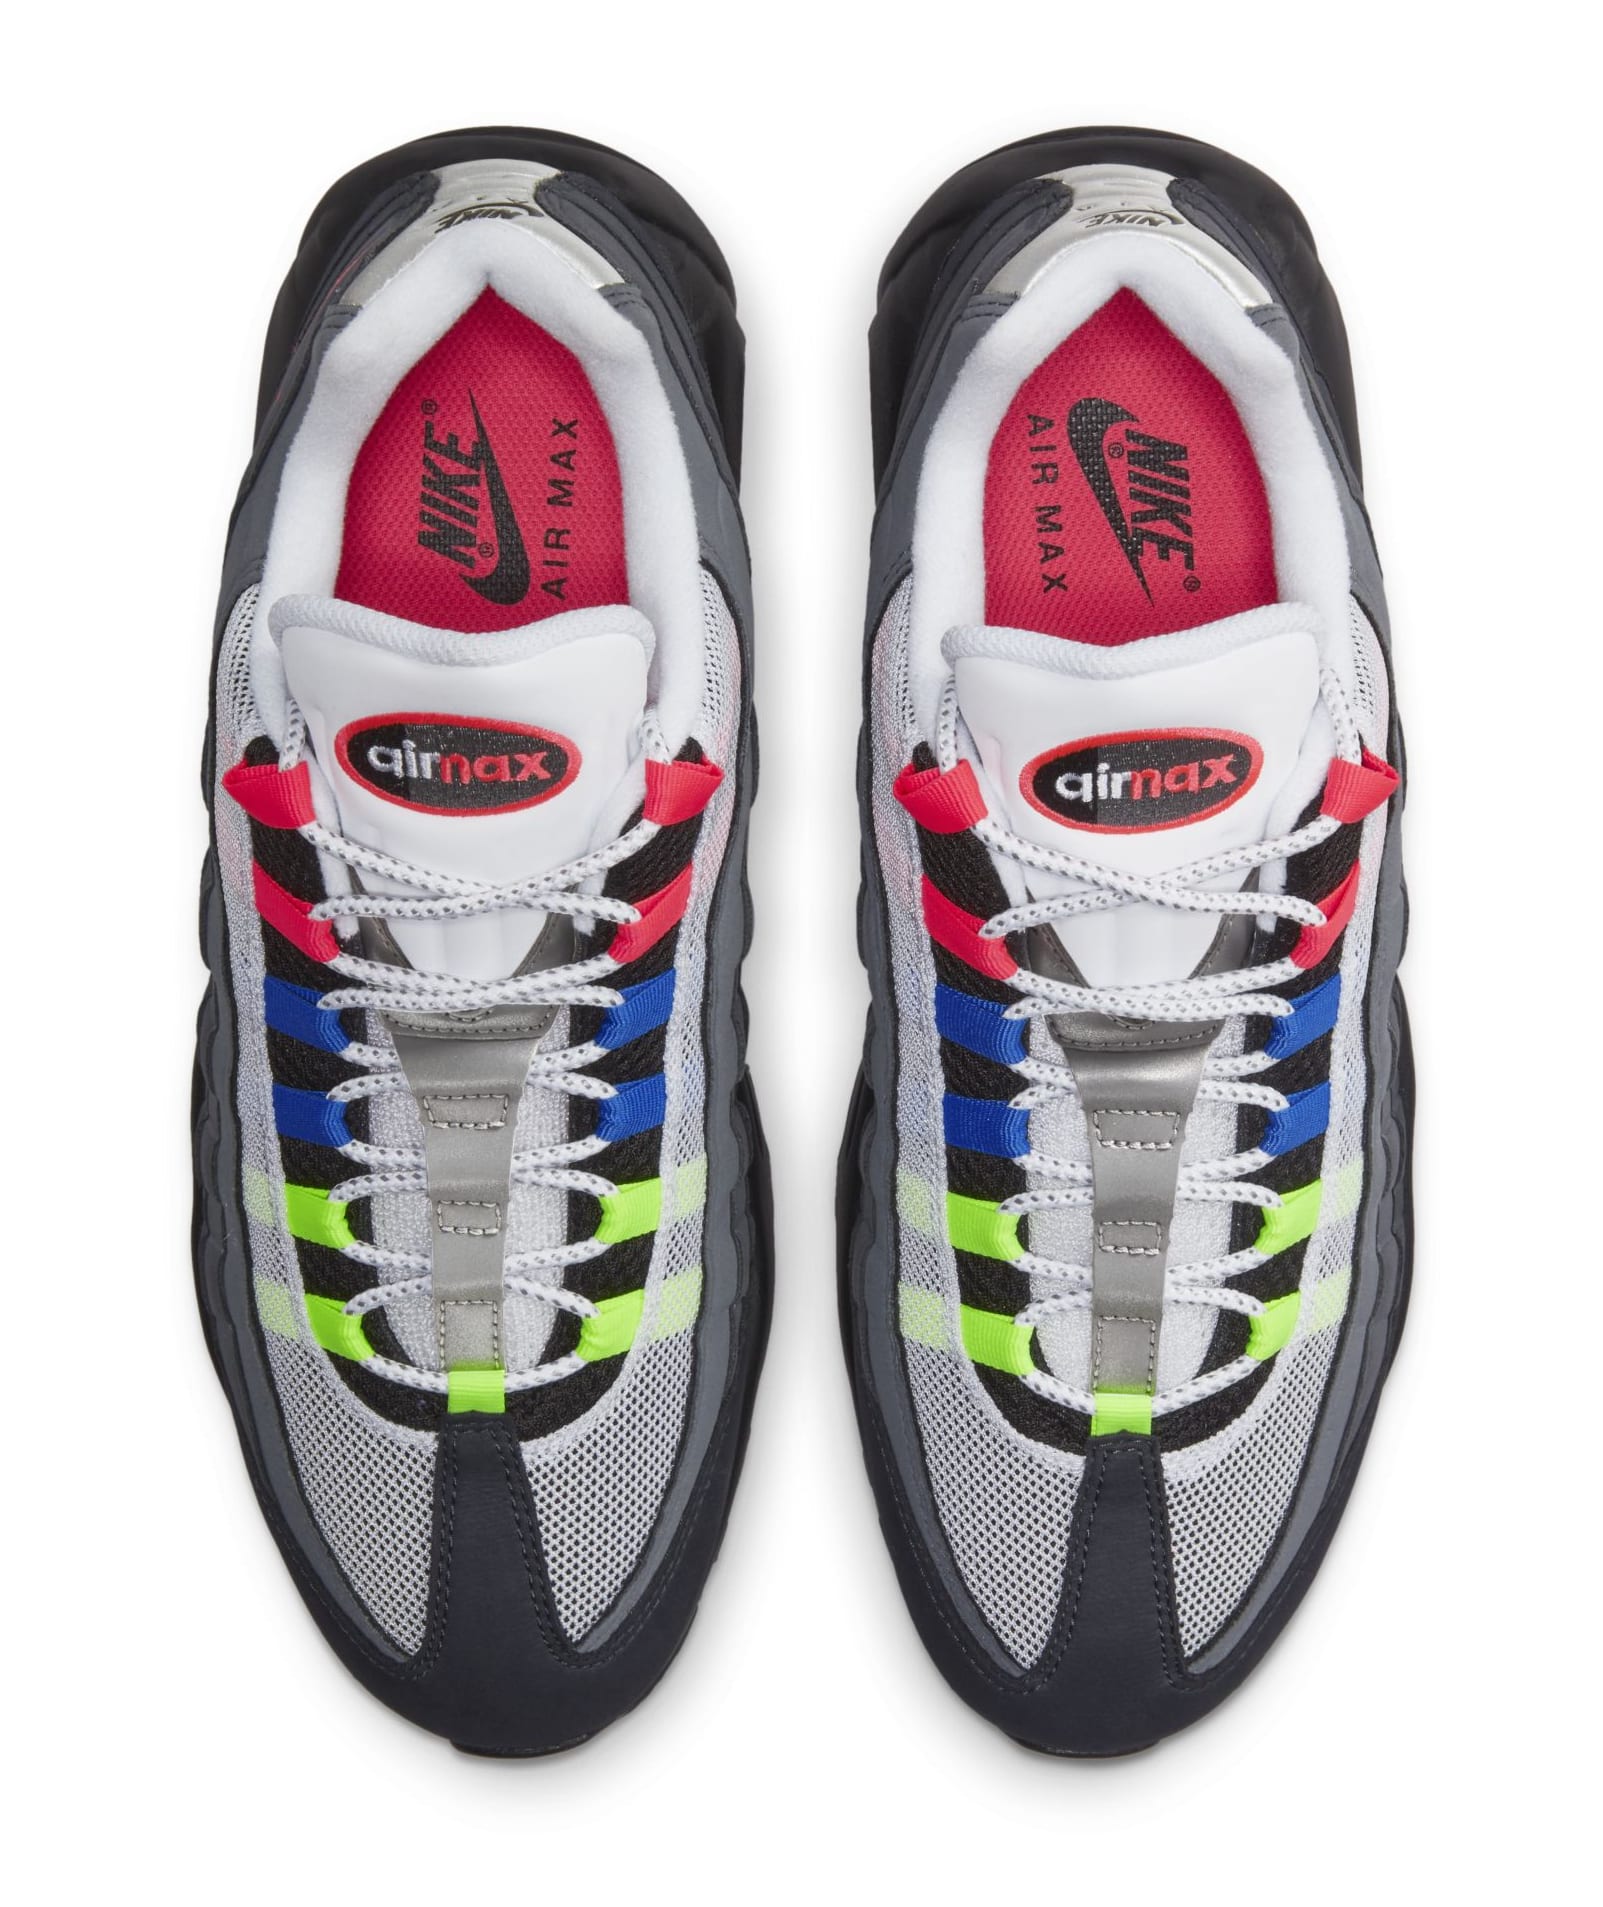 Colorways Together on This Air Max 95 | Complex